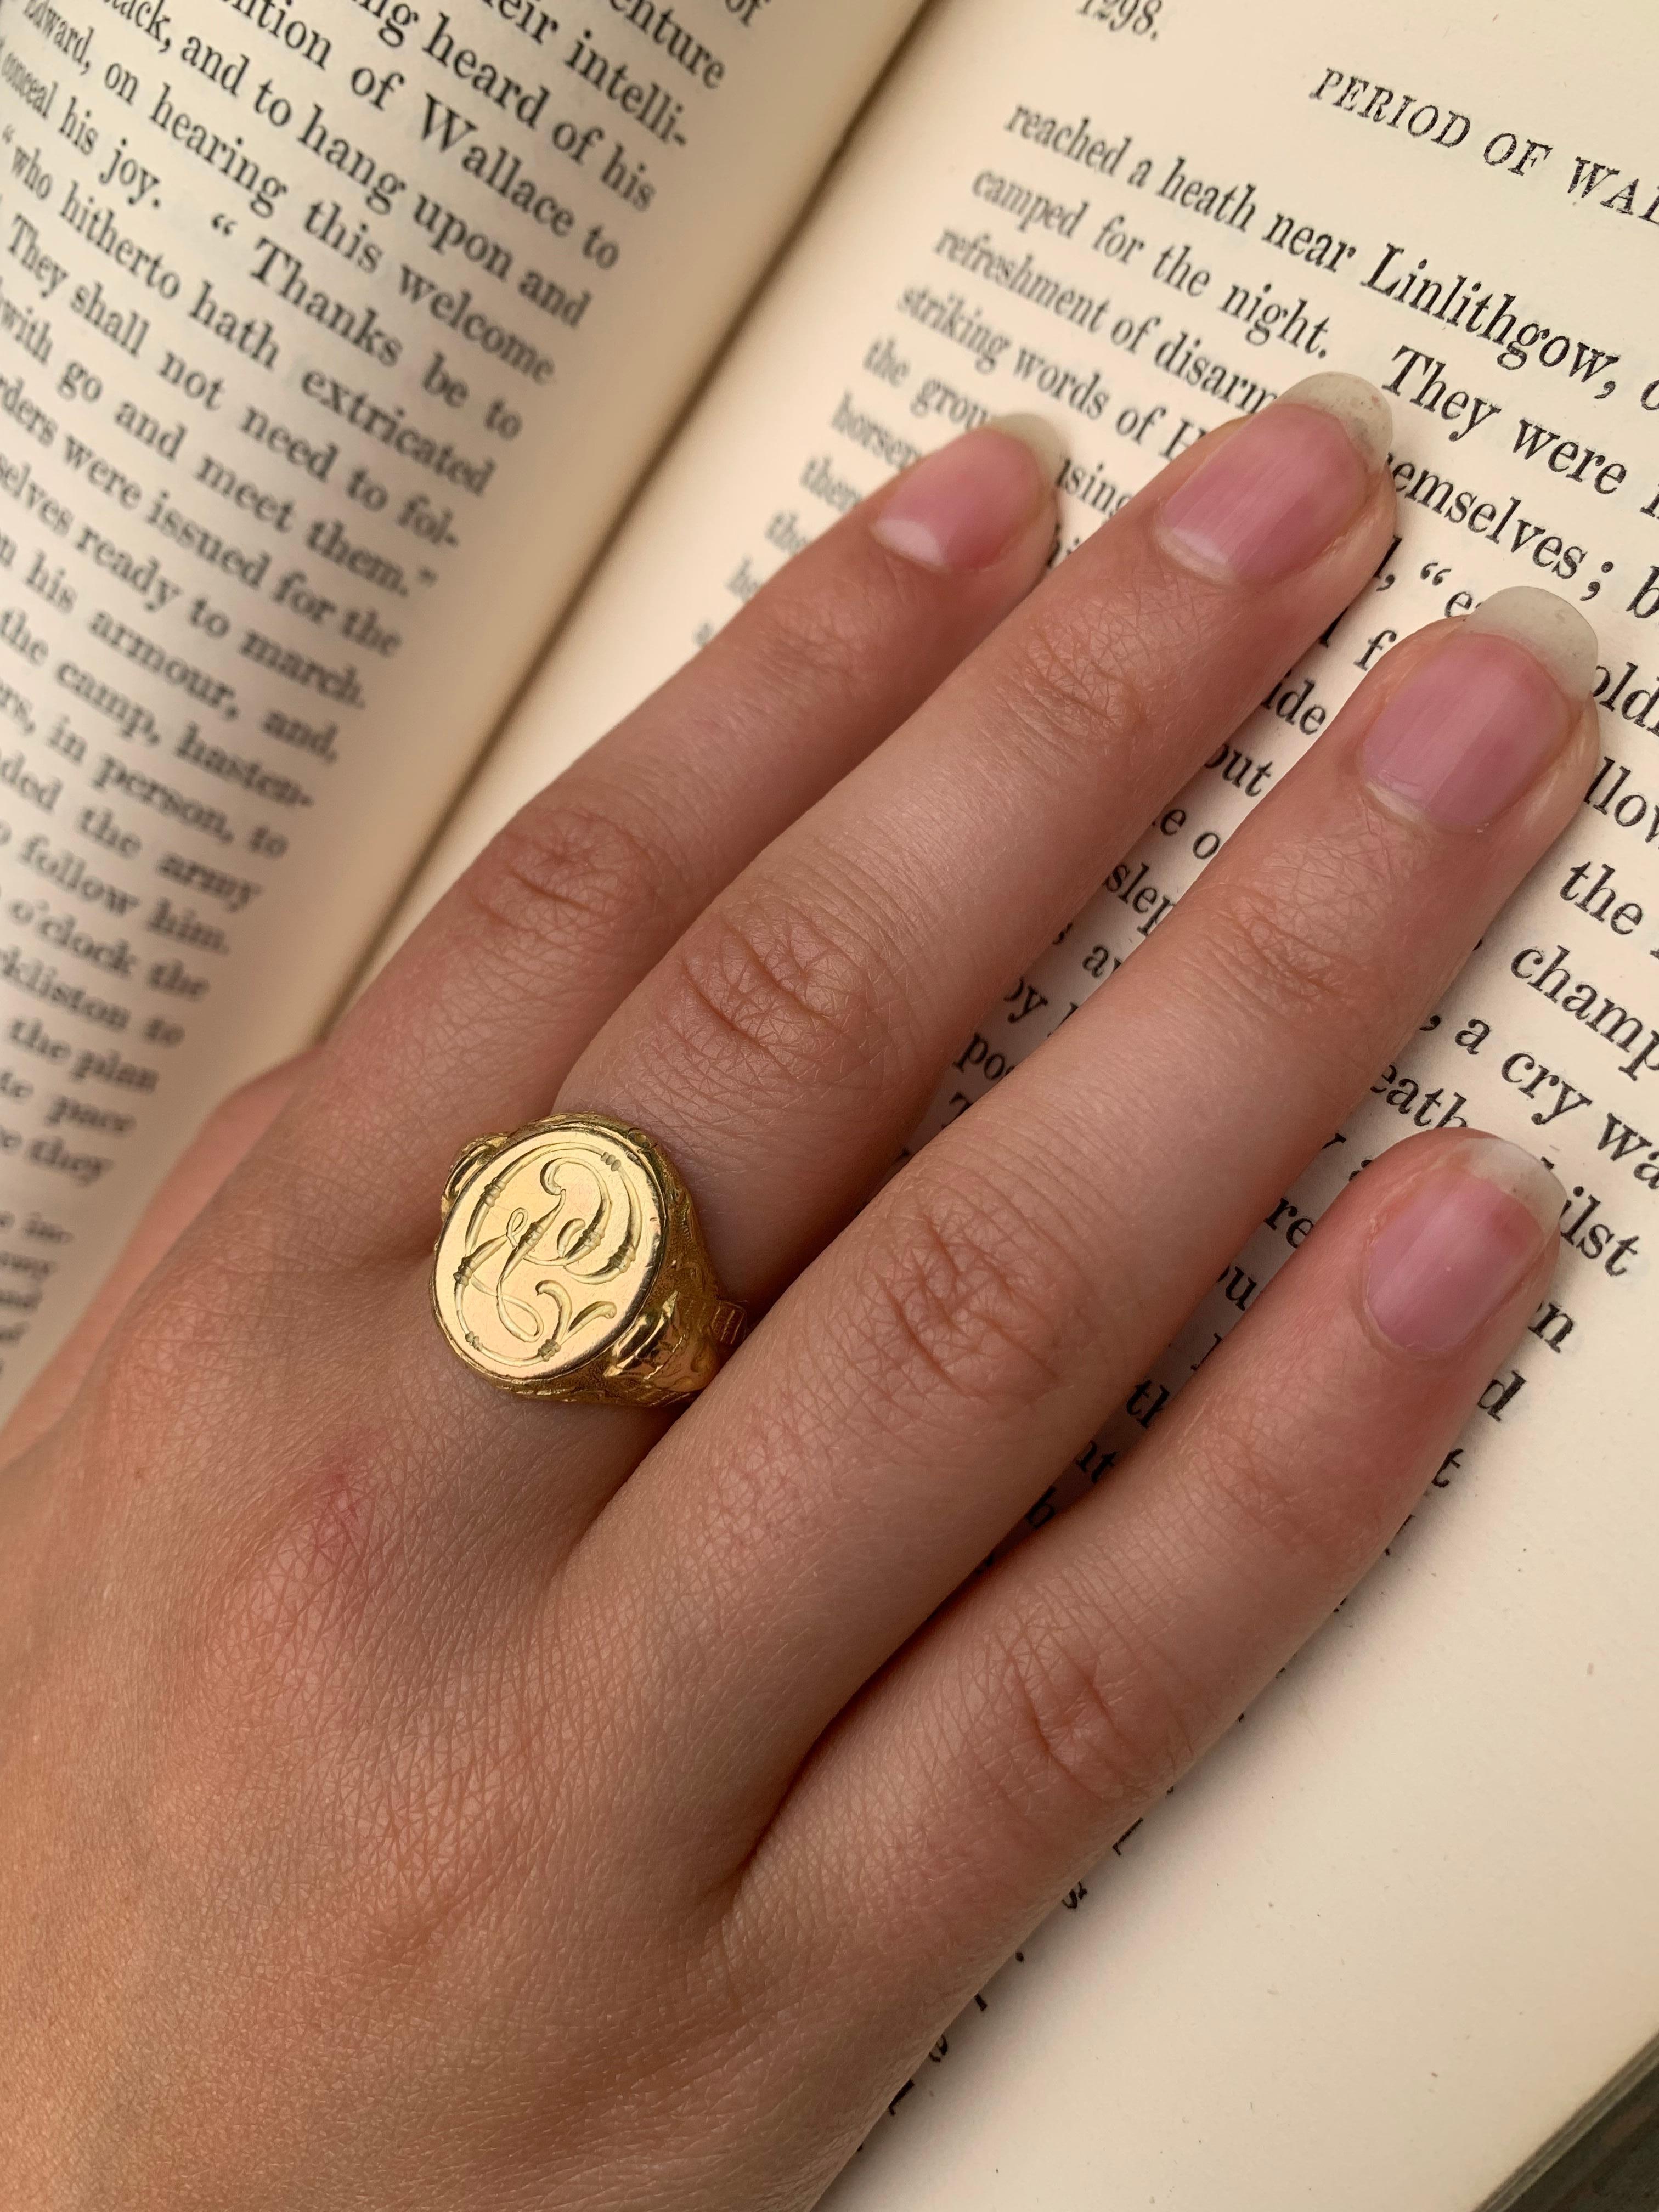 19th Century Egyptian Revival period 14K yellow gold Sphinx signet ring 
Circa 1870
Unusual, beautifully detailed antique signet ring with a pair of Sphinxes at the shoulders, each flanked by a lizard and a pair of storks. The oval signet face